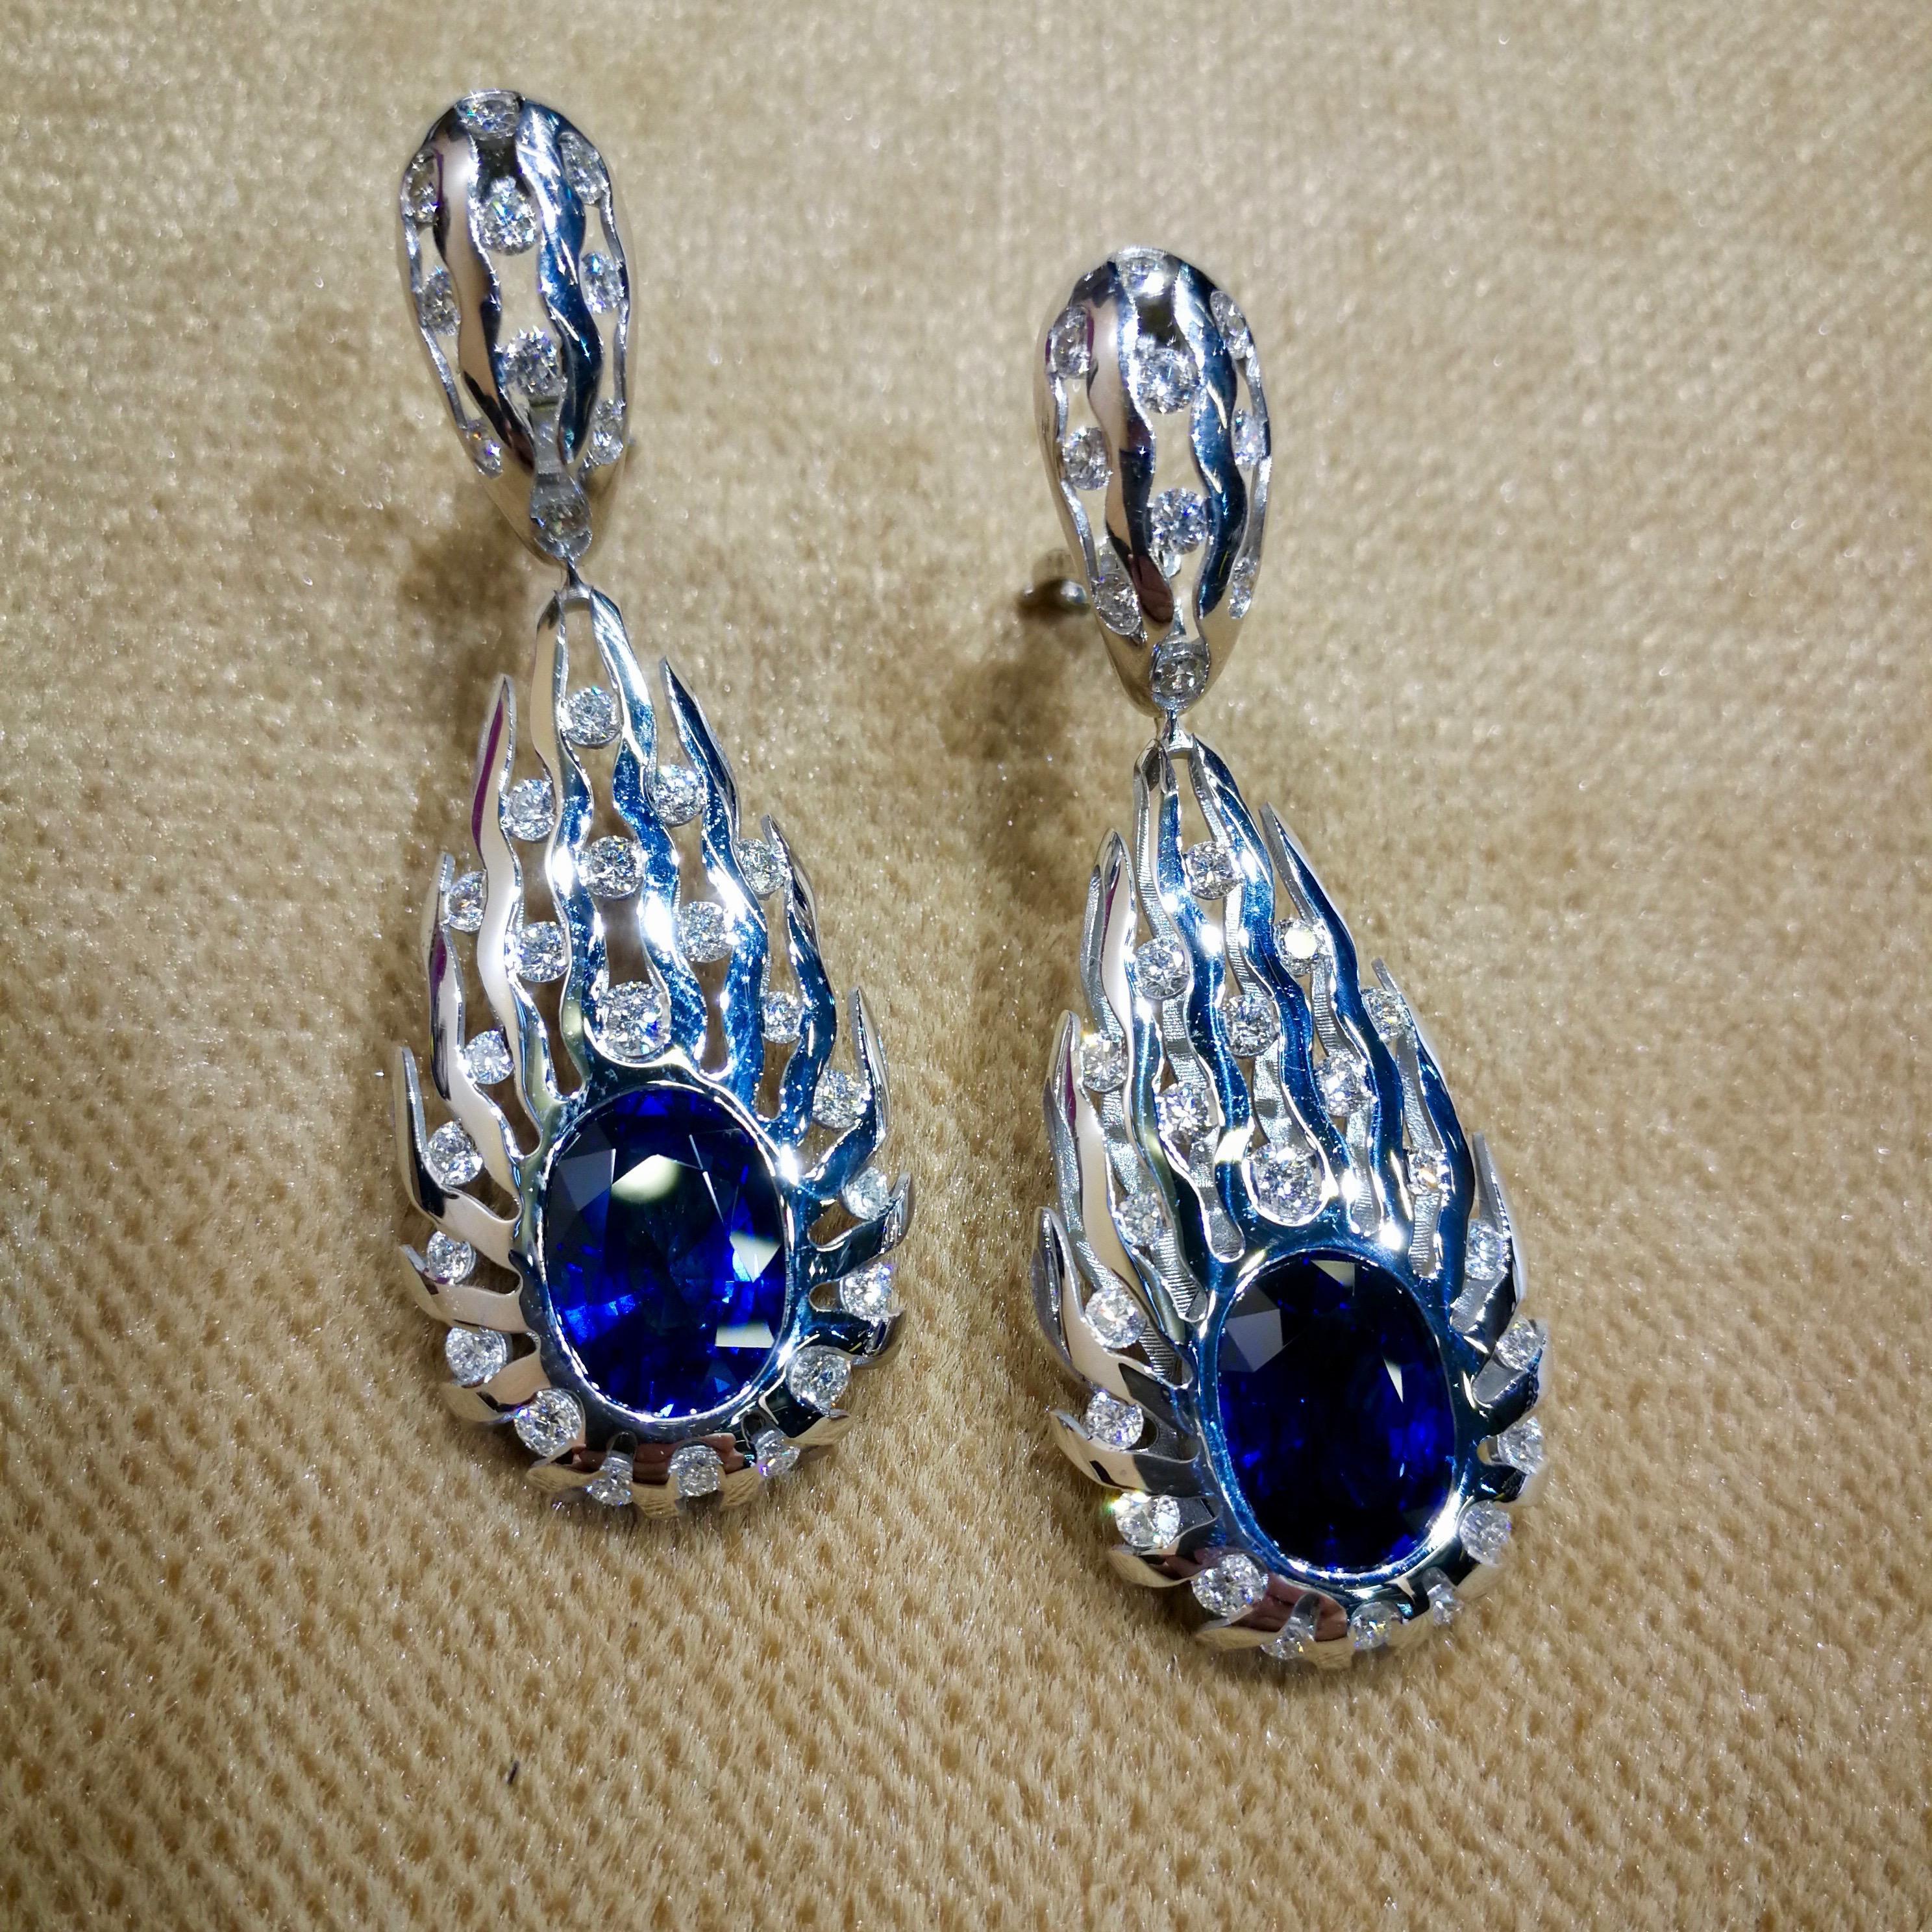 GRS Certified 8.03 Carat Royal Blue Sapphire Diamonds 18 Karat White Gold Earrings
These exquisite Earrings showcase two oval-cut Royal Blue Sapphires of over 8 Carats. Despite the fact that these two Royal Blue Sapphires are self-sufficient, paired